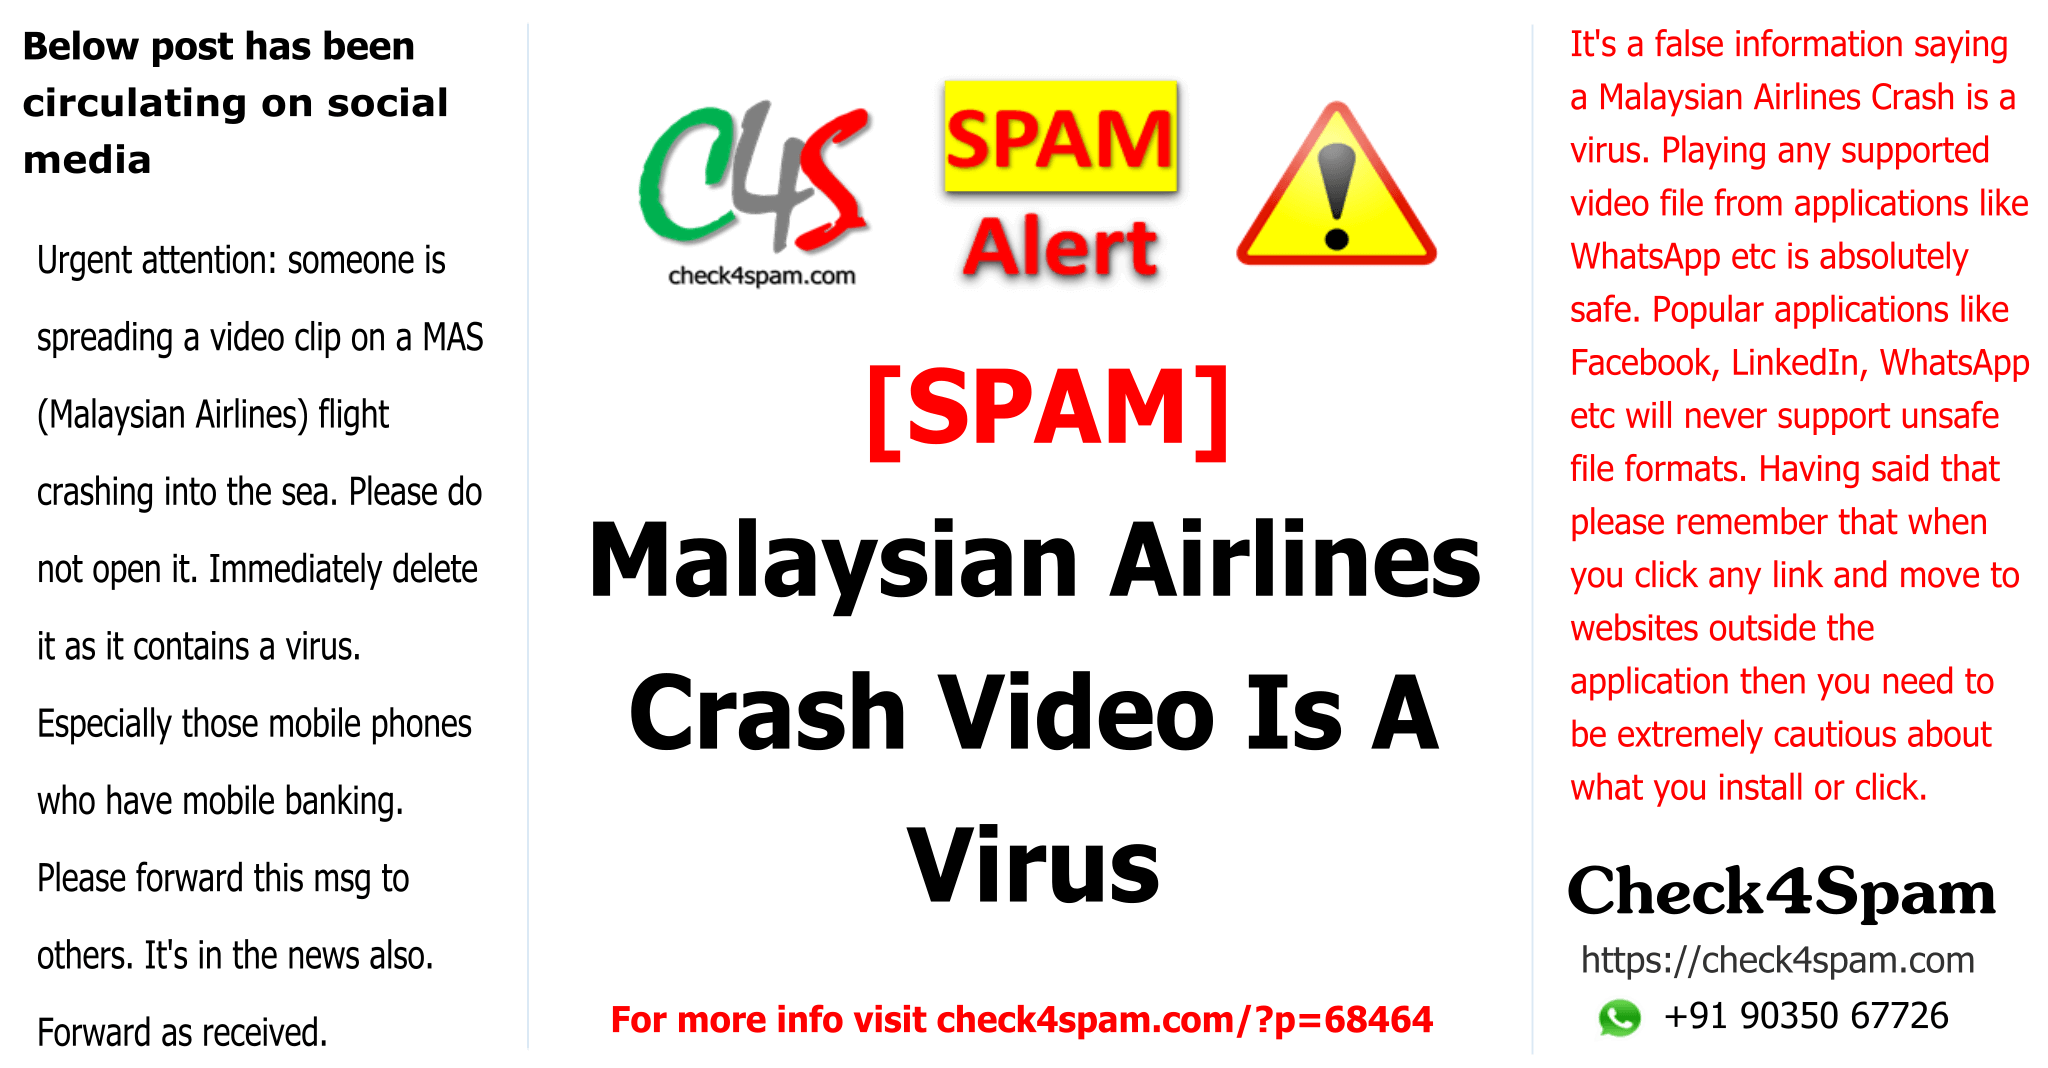 malaysian airlines crash video - SPAM